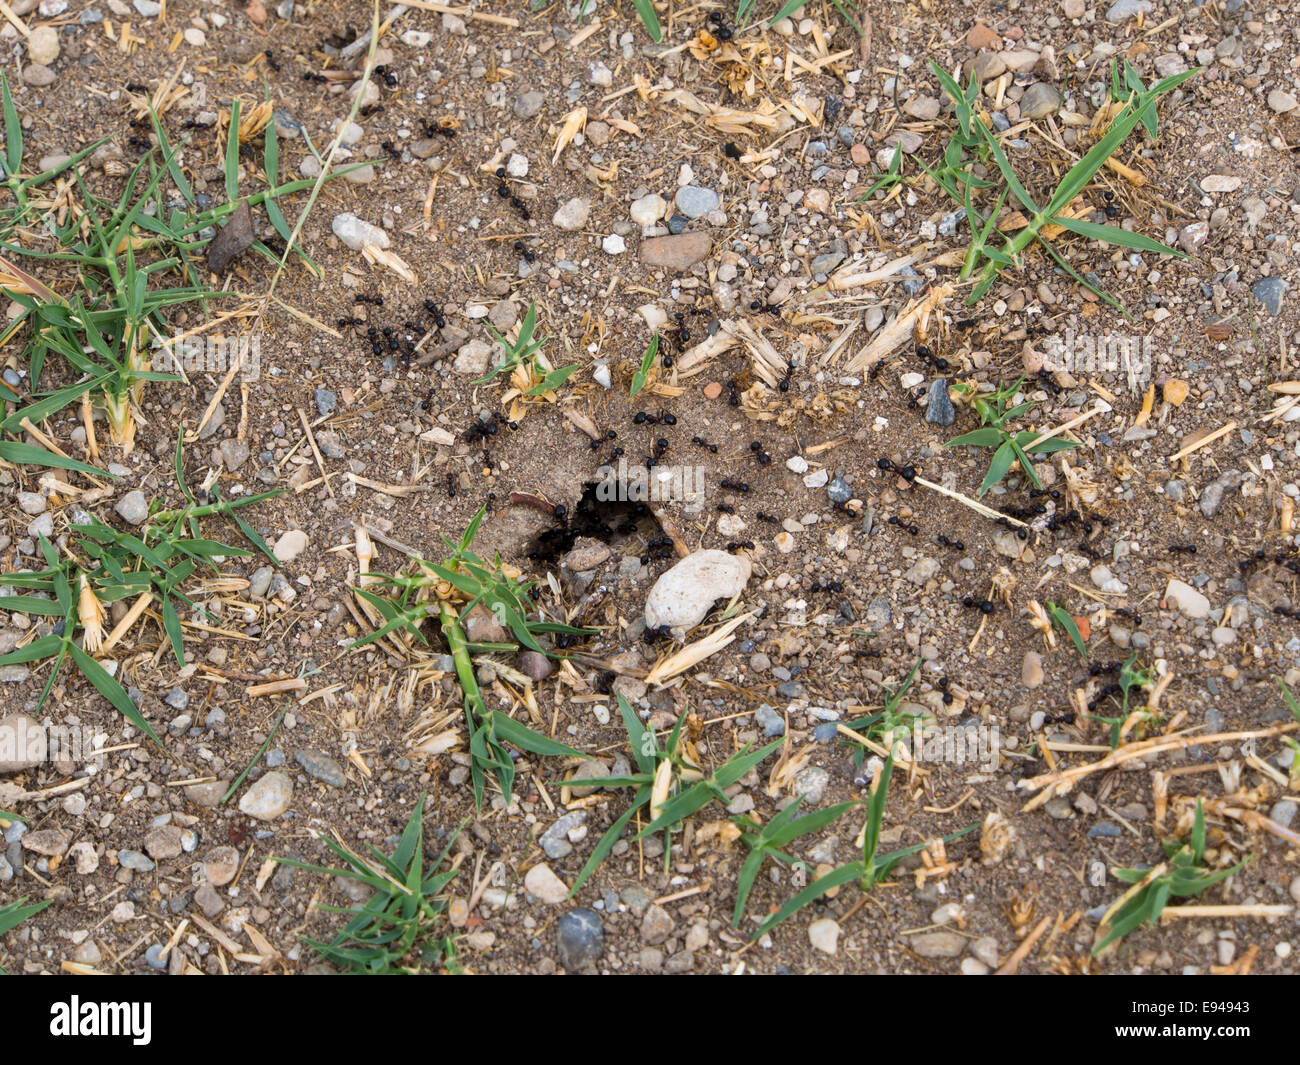 European underground living ants trafficking in and out of their hole in the ground, Samos Greece Stock Photo